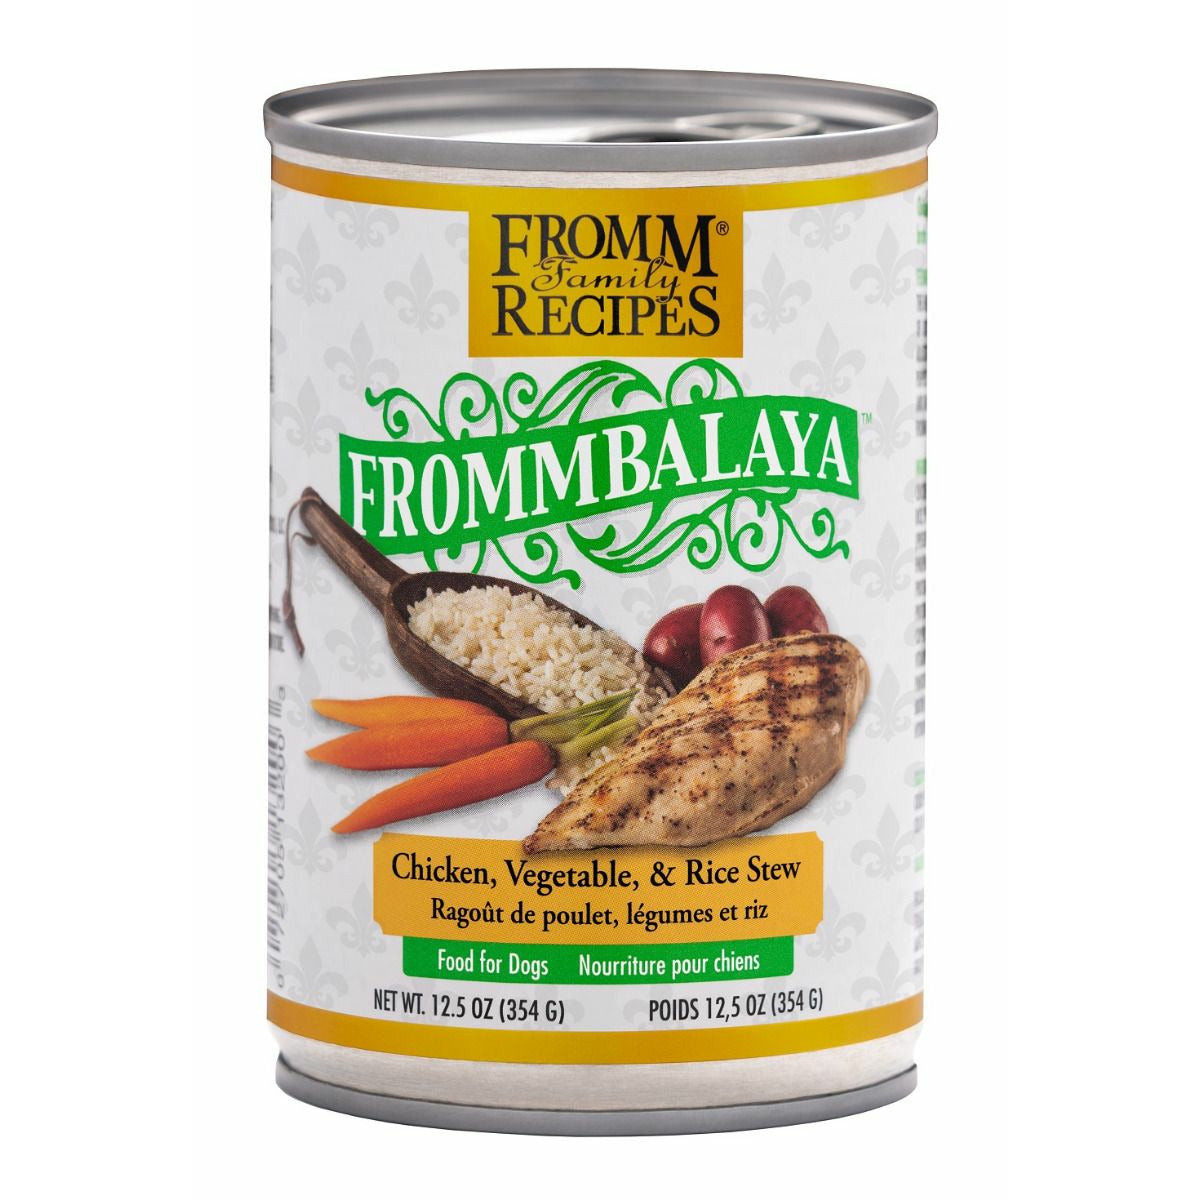 Frommbalaya Canned Dog Food Chicken, Veg & Rice Stew  Canned Dog Food  | PetMax Canada